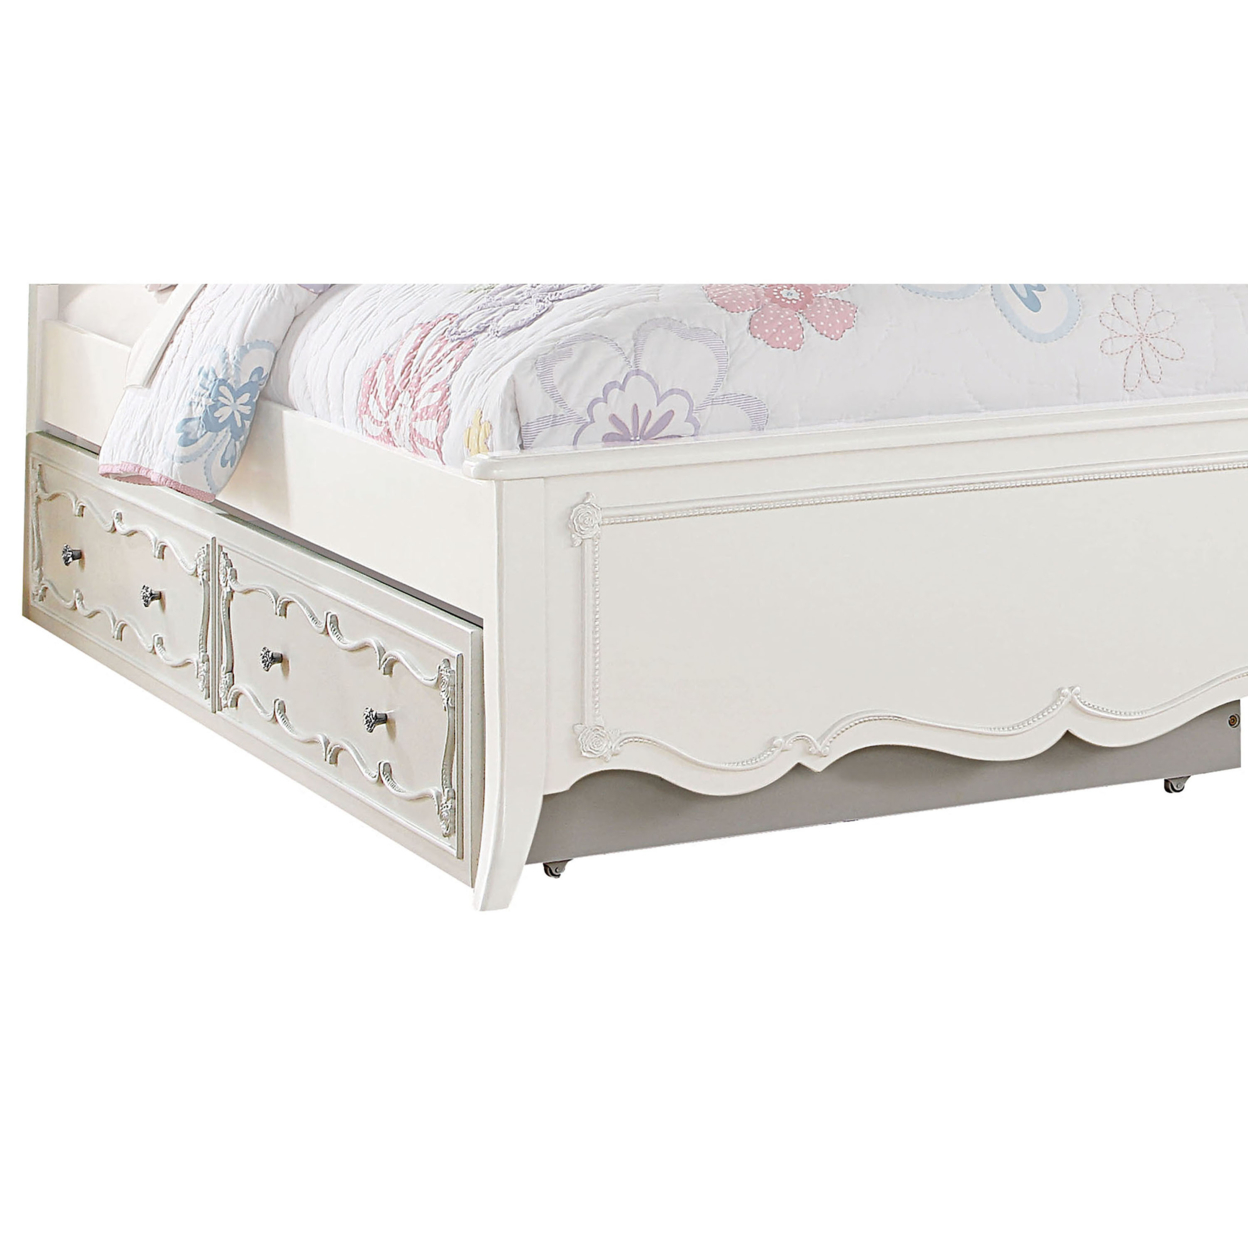 Twin Size Wooden Trundle With Round Knobs And Caster Wheels, White- Saltoro Sherpi